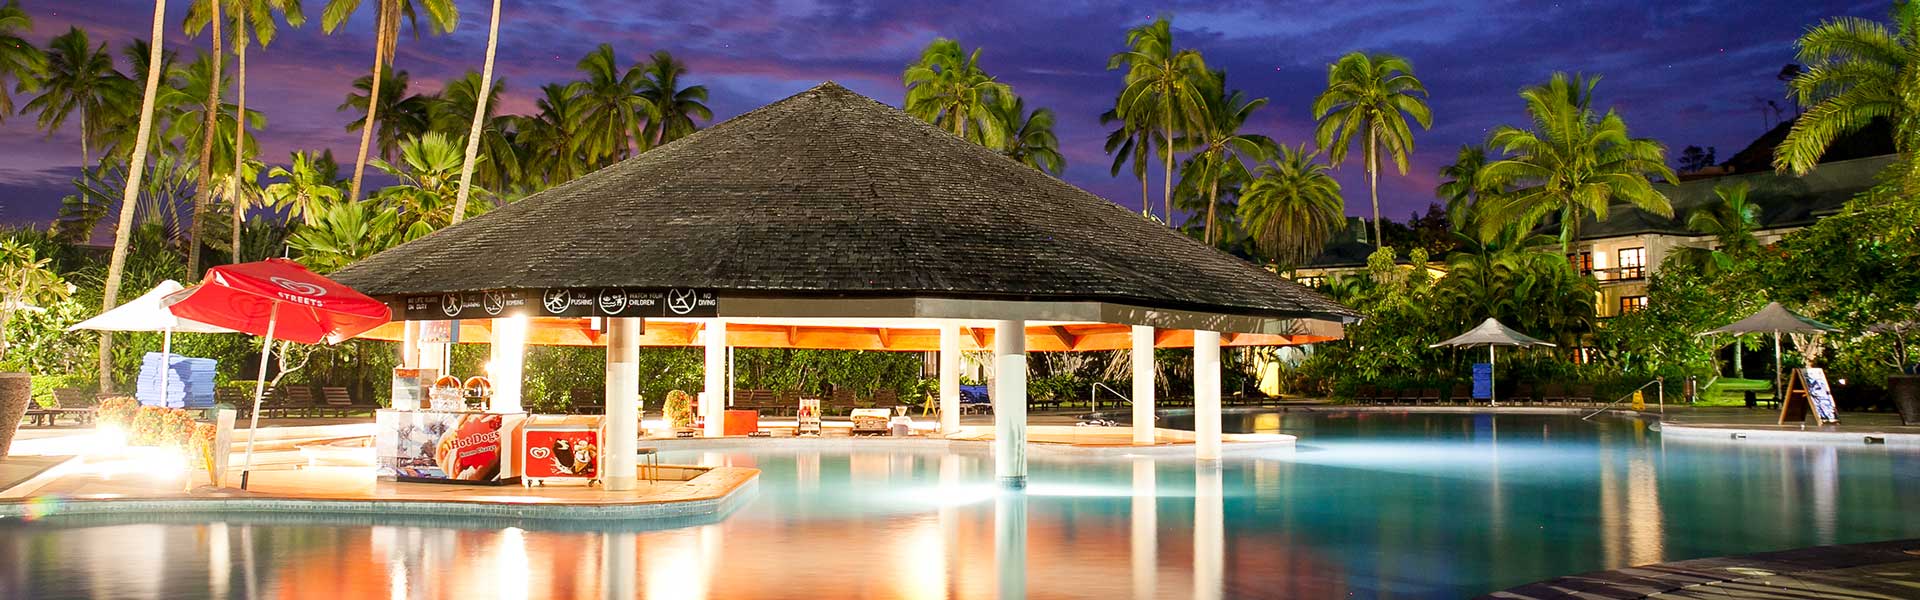 Bula Bubble: 5 Nights Inclusive of Meals, Beverages, Transfers